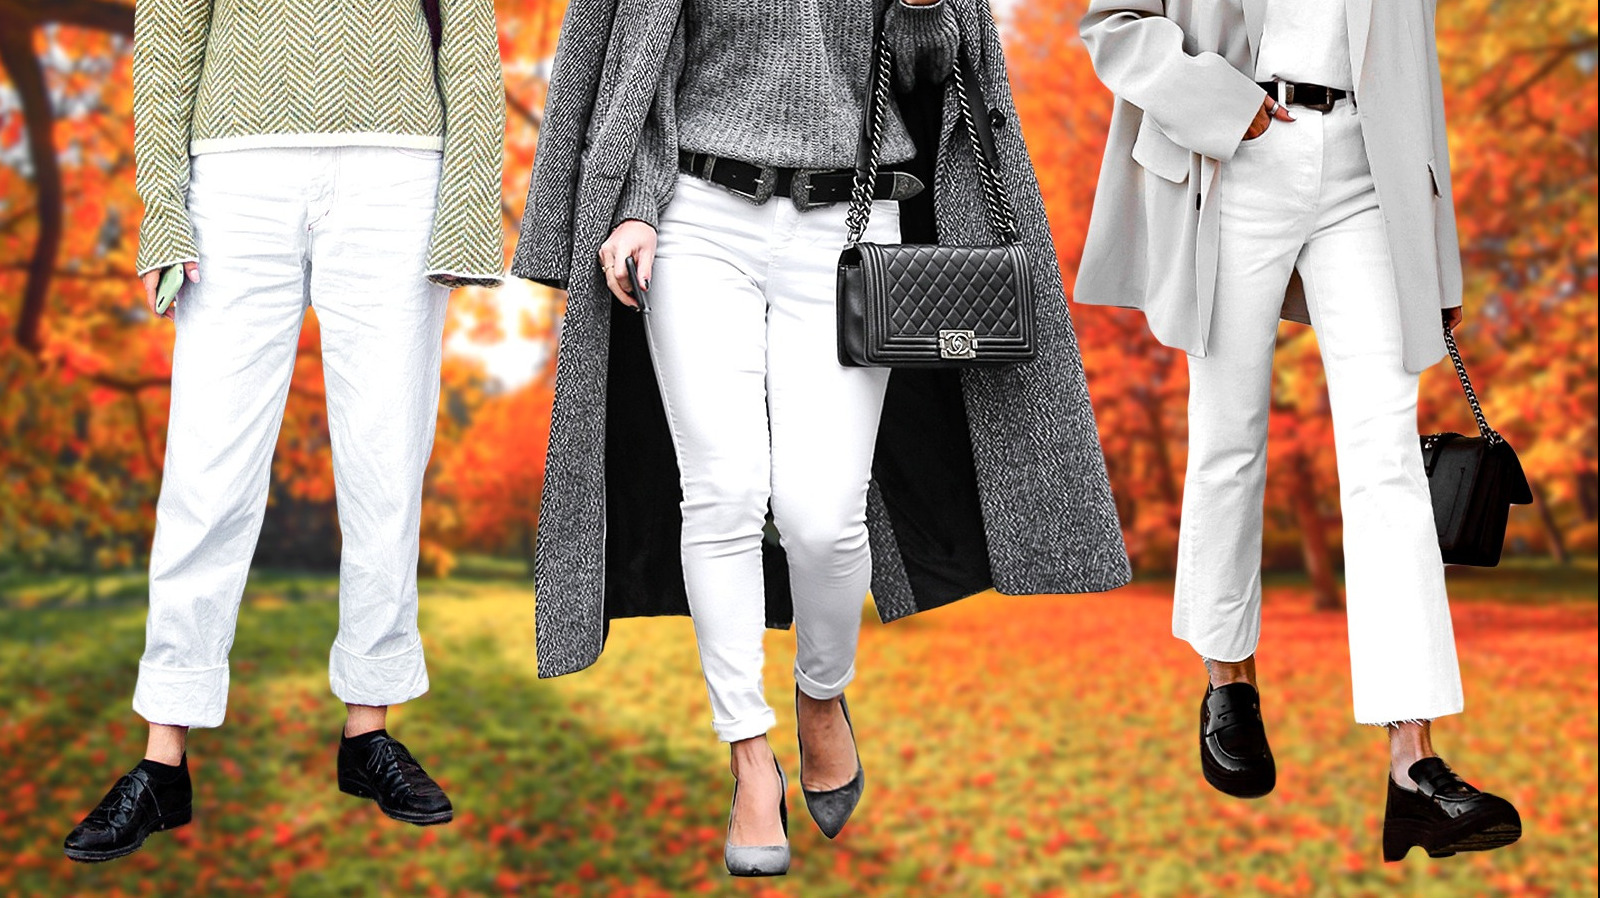 Shop Your Closet: 13 Ways To Wear White Jeans After Labor Day